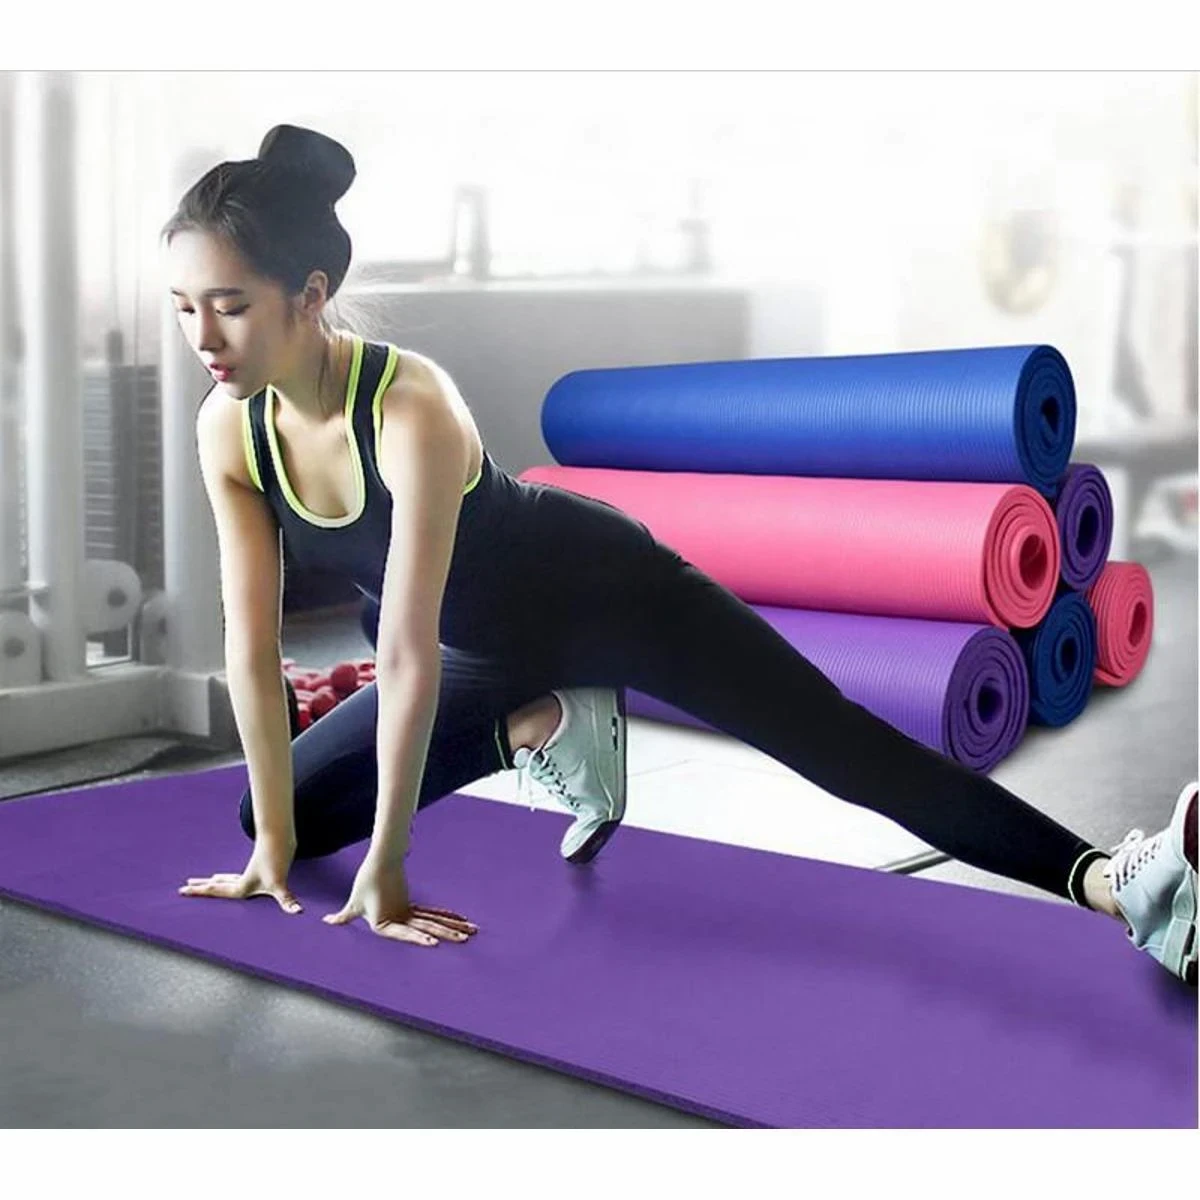 Yoga and Exercise Mats